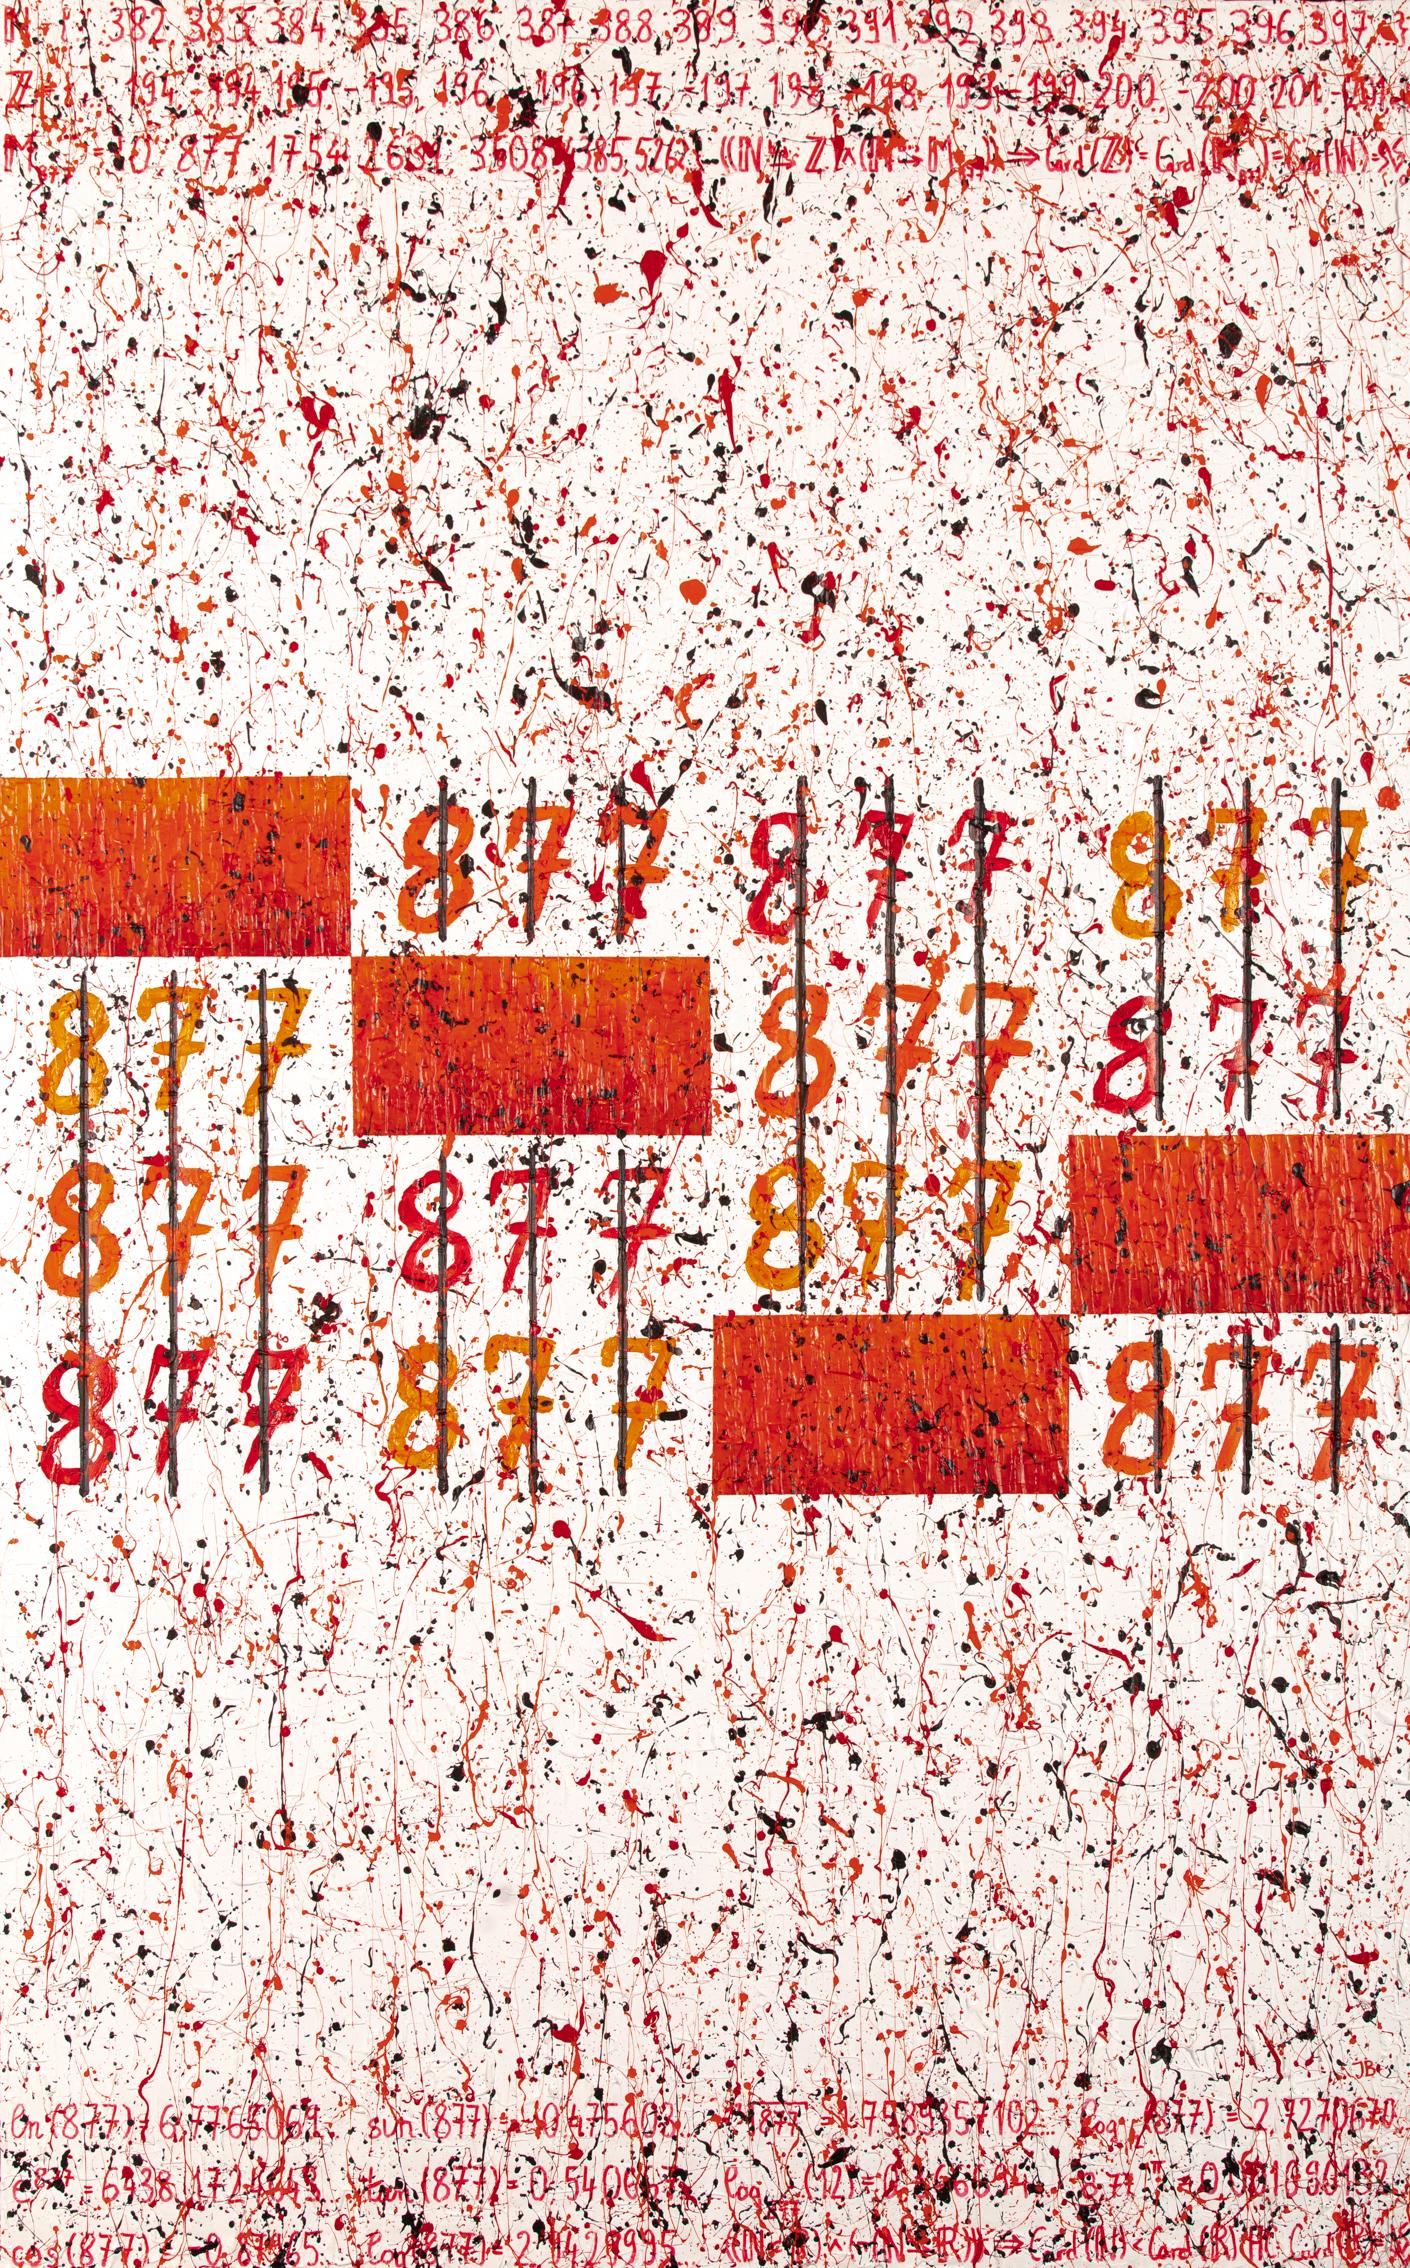 CANTORS' NUMBERS #877 - Painting by Jean-Claude Bossel 